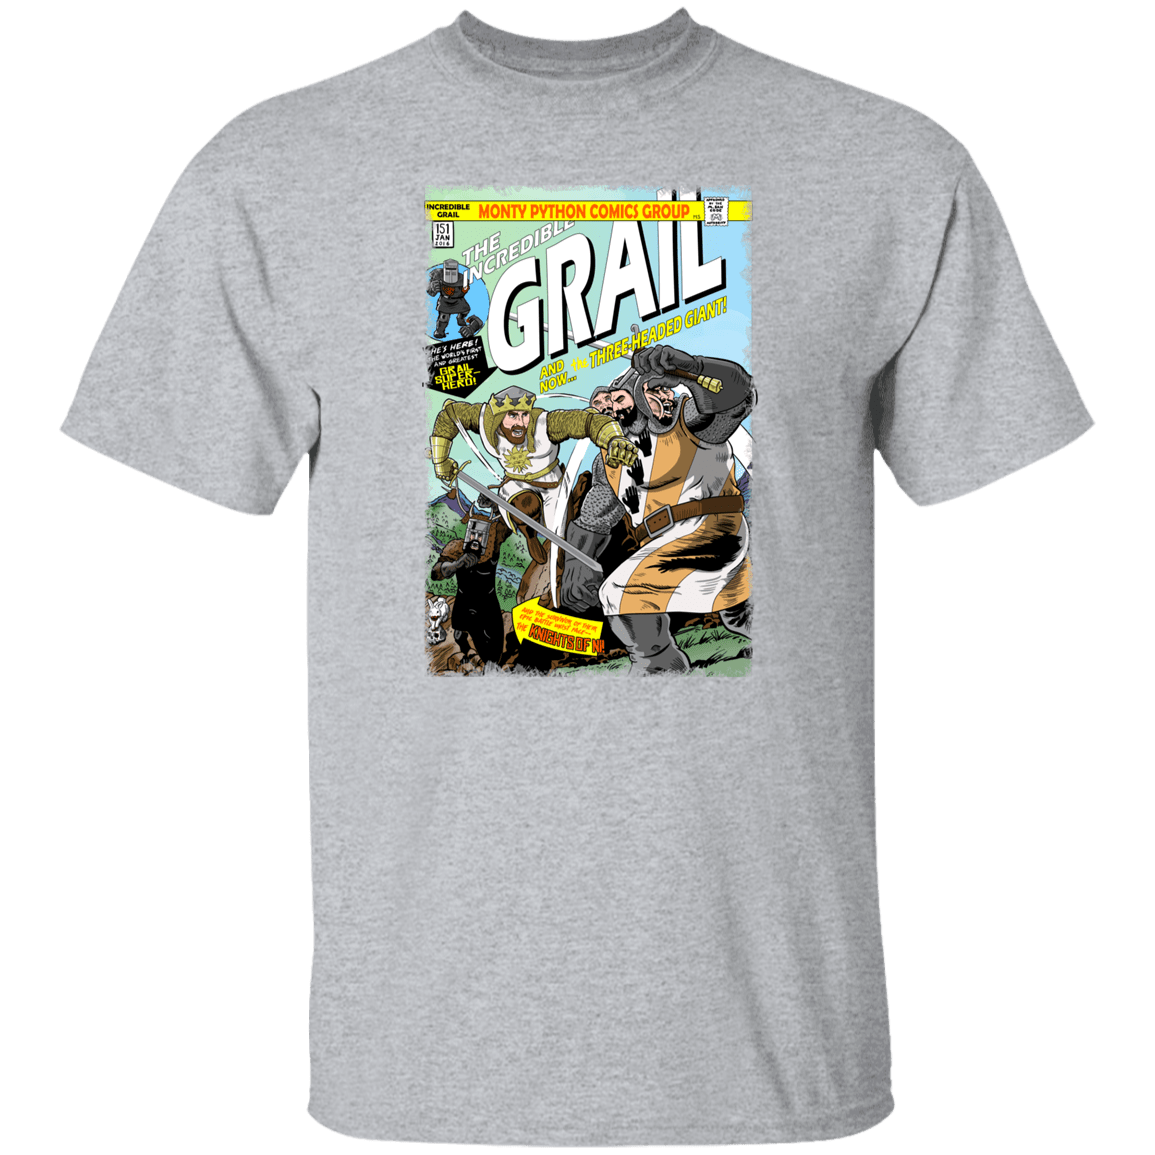 T-Shirts Sport Grey / S The Incredible Grail T-Shirt